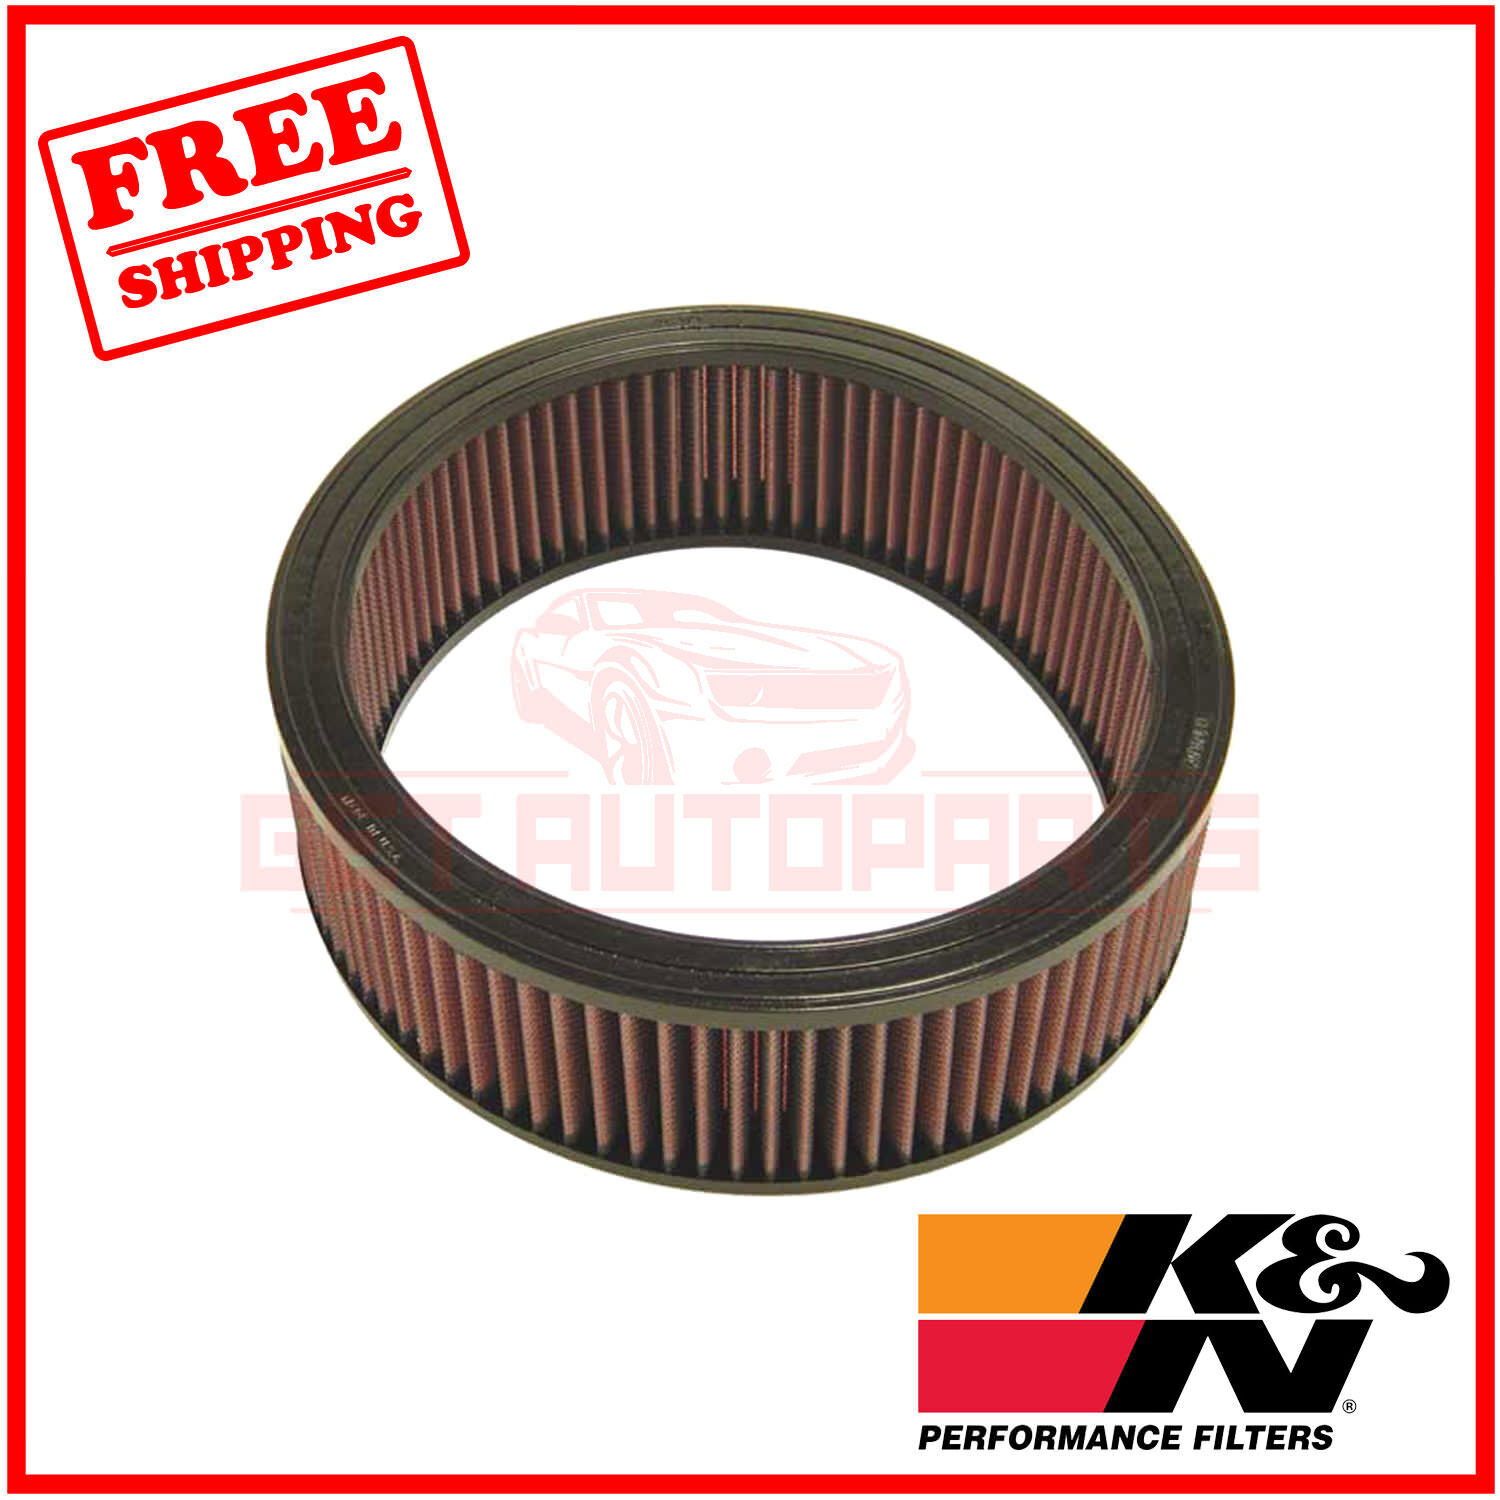 K&N Replacement Air Filter for Dodge D100 Pickup 1972-1974